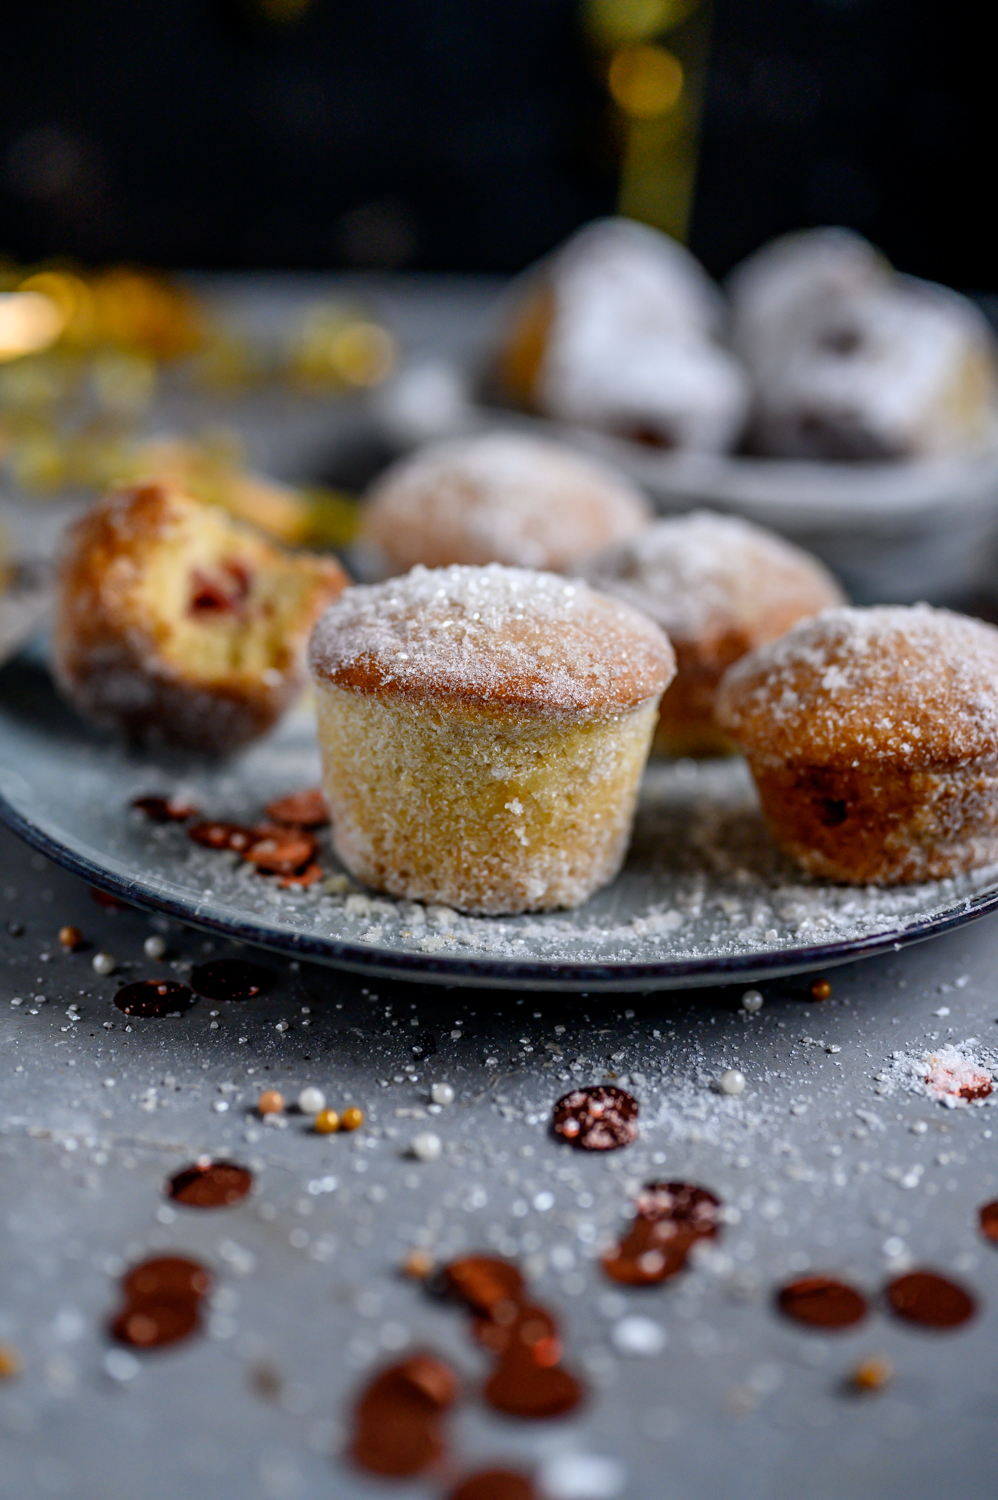 Muffnuts - Muffin Berliner - Muffin Dounts filled with Jam